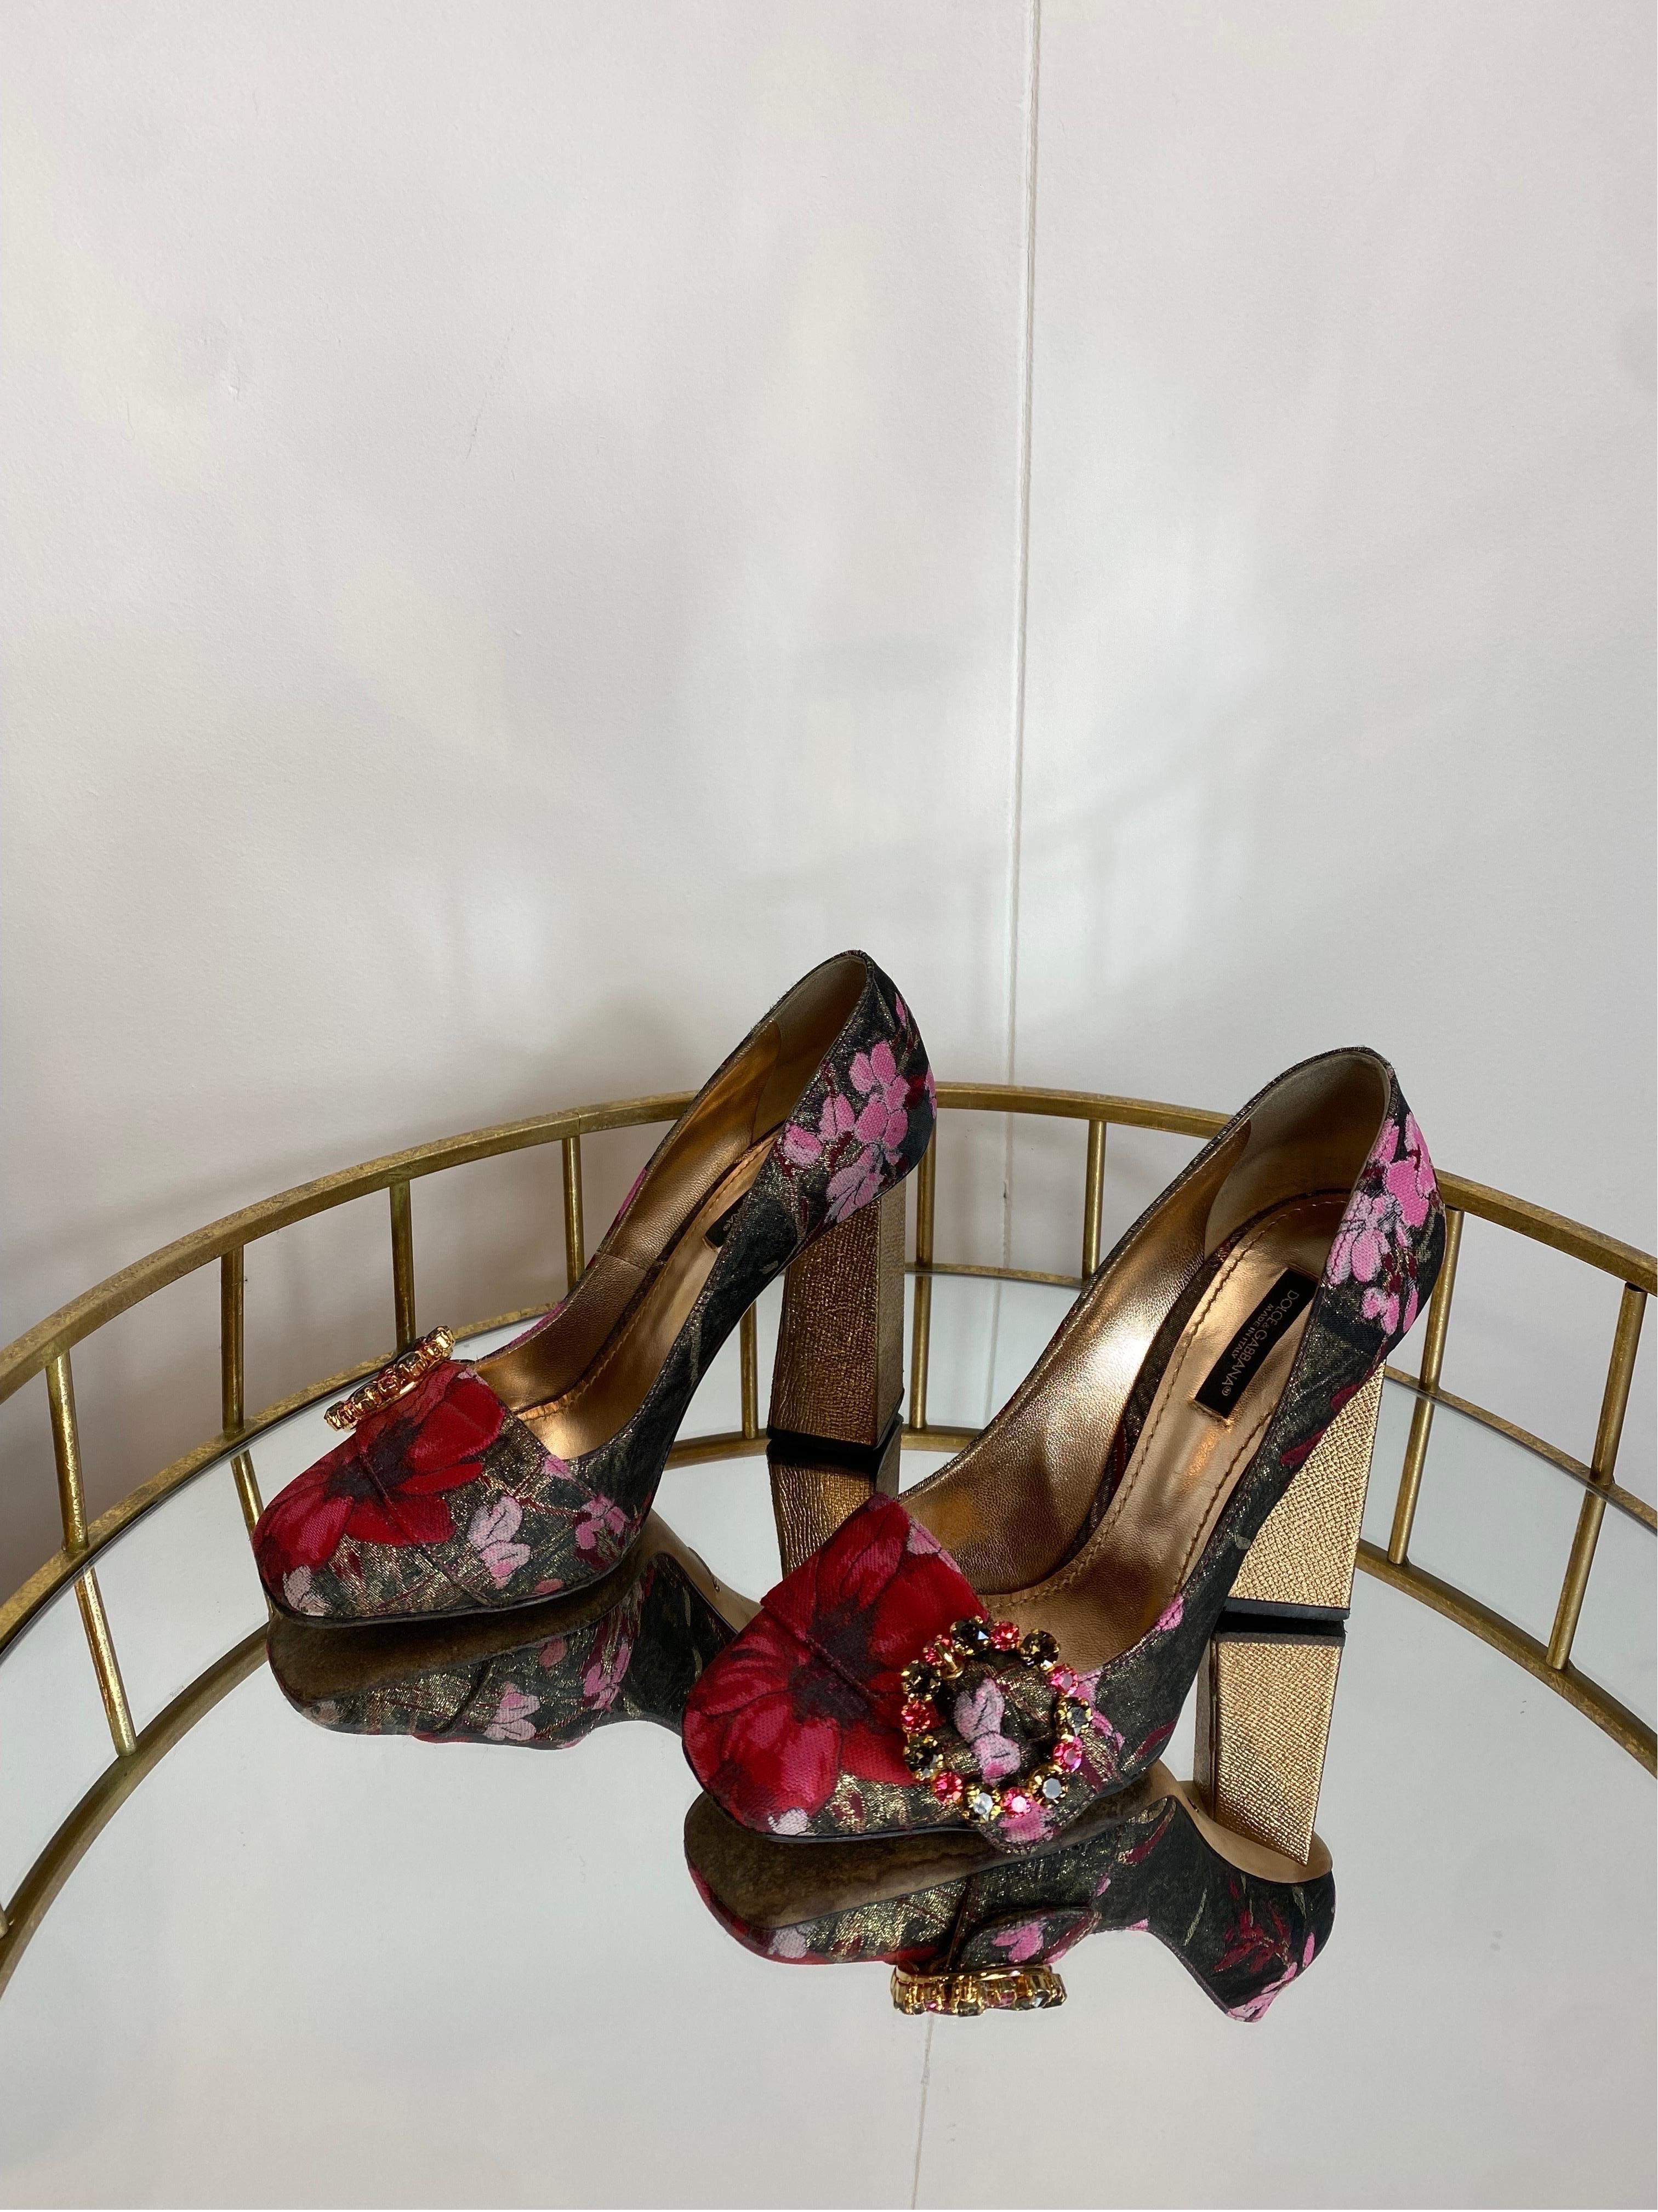 Dolce and Gabbana Jacquard Pumps.
Spring summer 2017 collection. Ready to wear.
In floral patterned fabric and jewel buckle.
Italian size 38
Inner sole 24 cm
Heel 10 cm
They come with original box.
Good general condition with only some signs of use